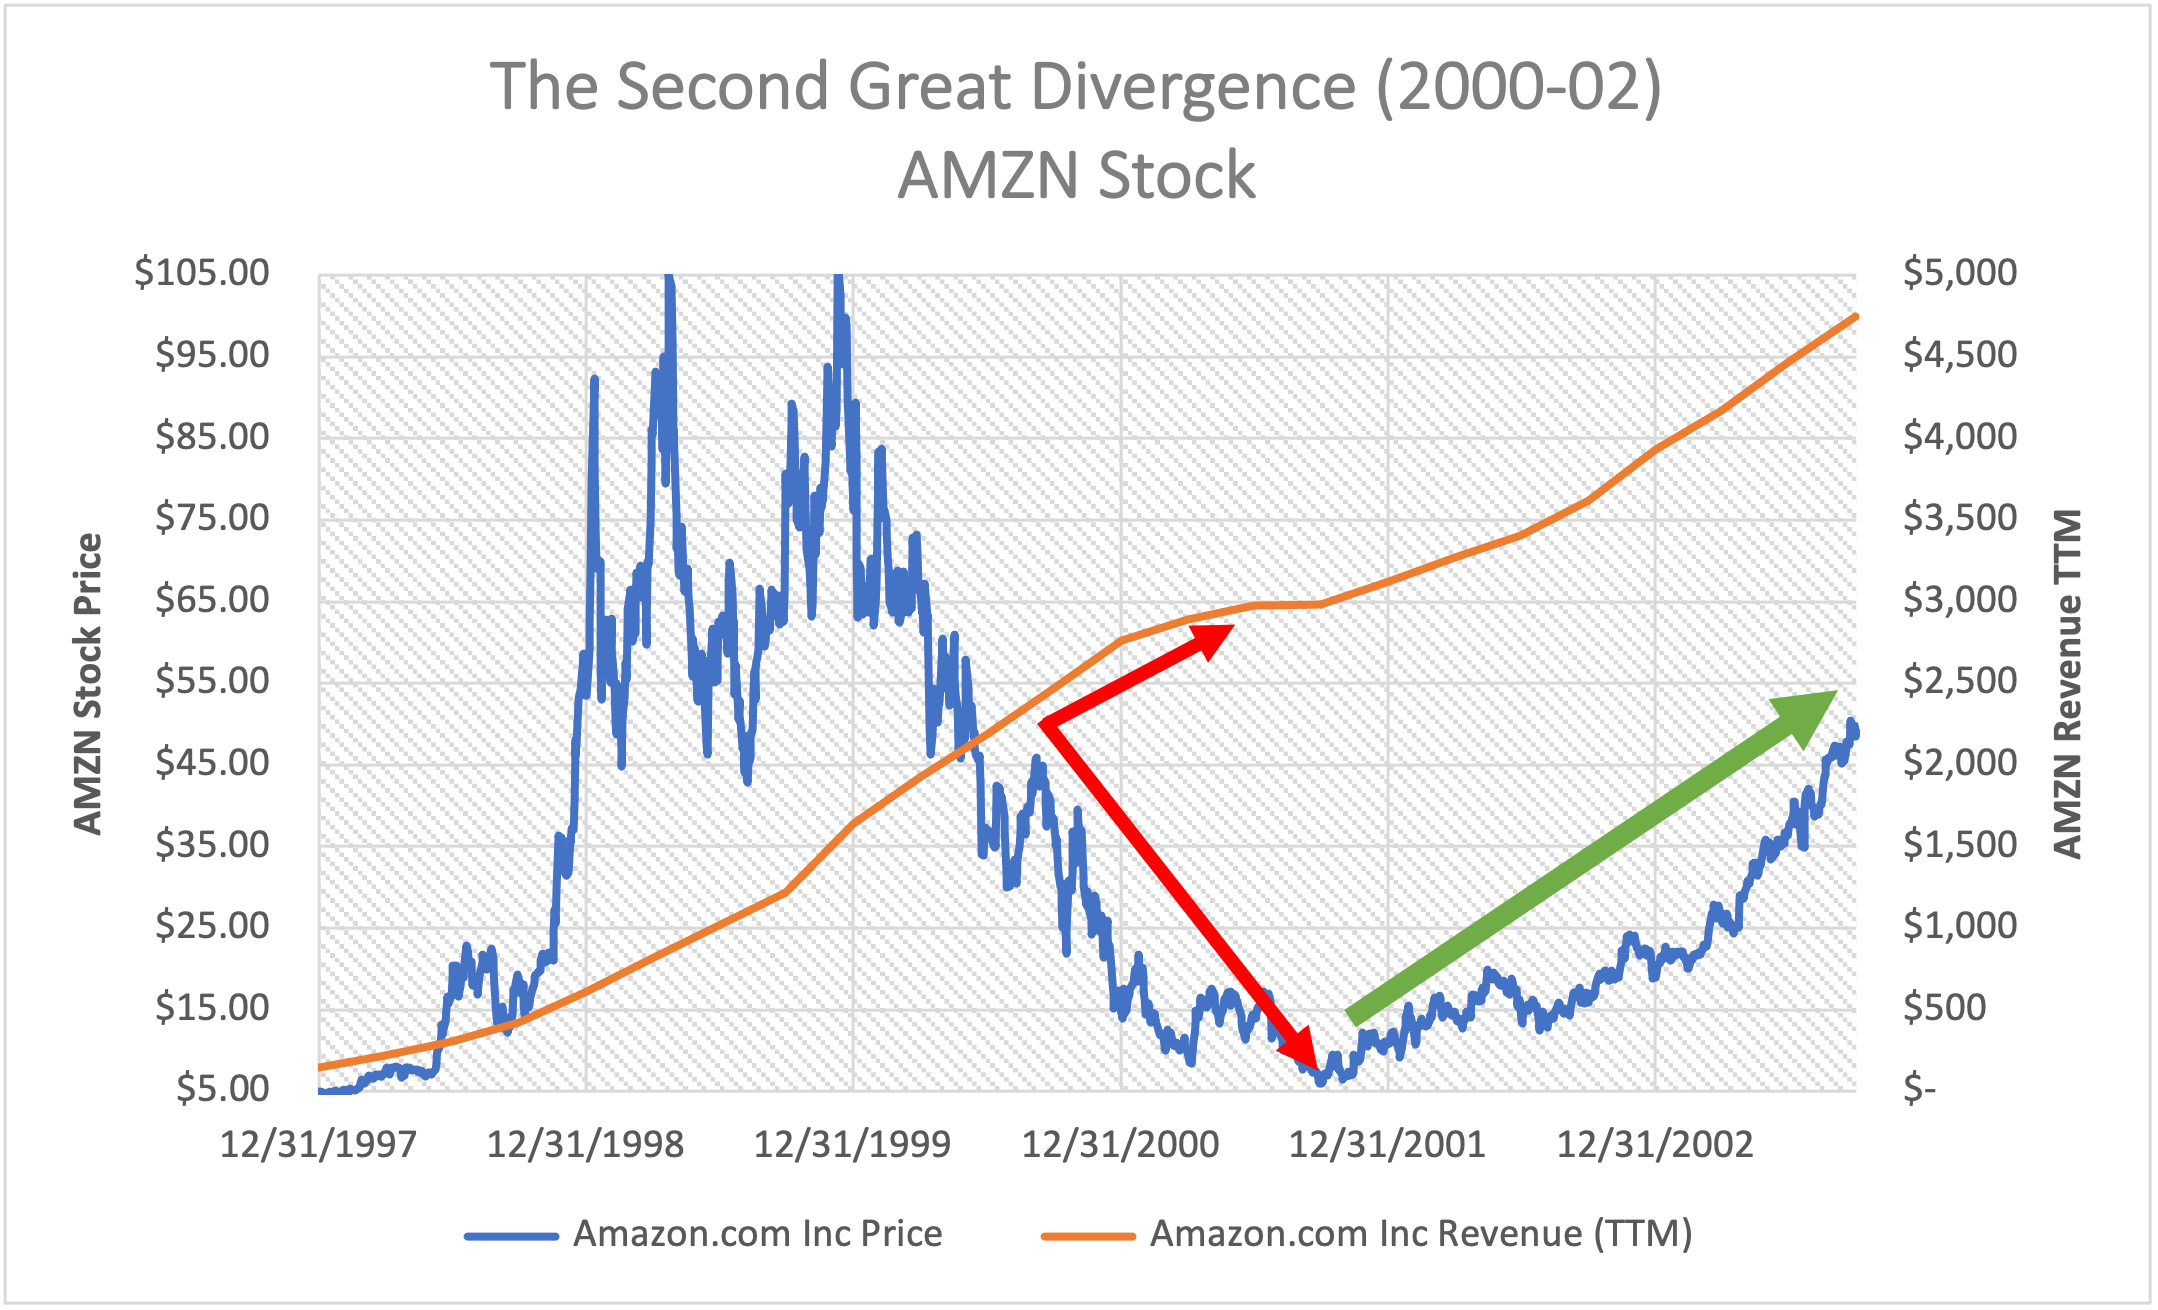 A chart showing the divergence of Amazon's stock price and revenue between 1997 and 2004.